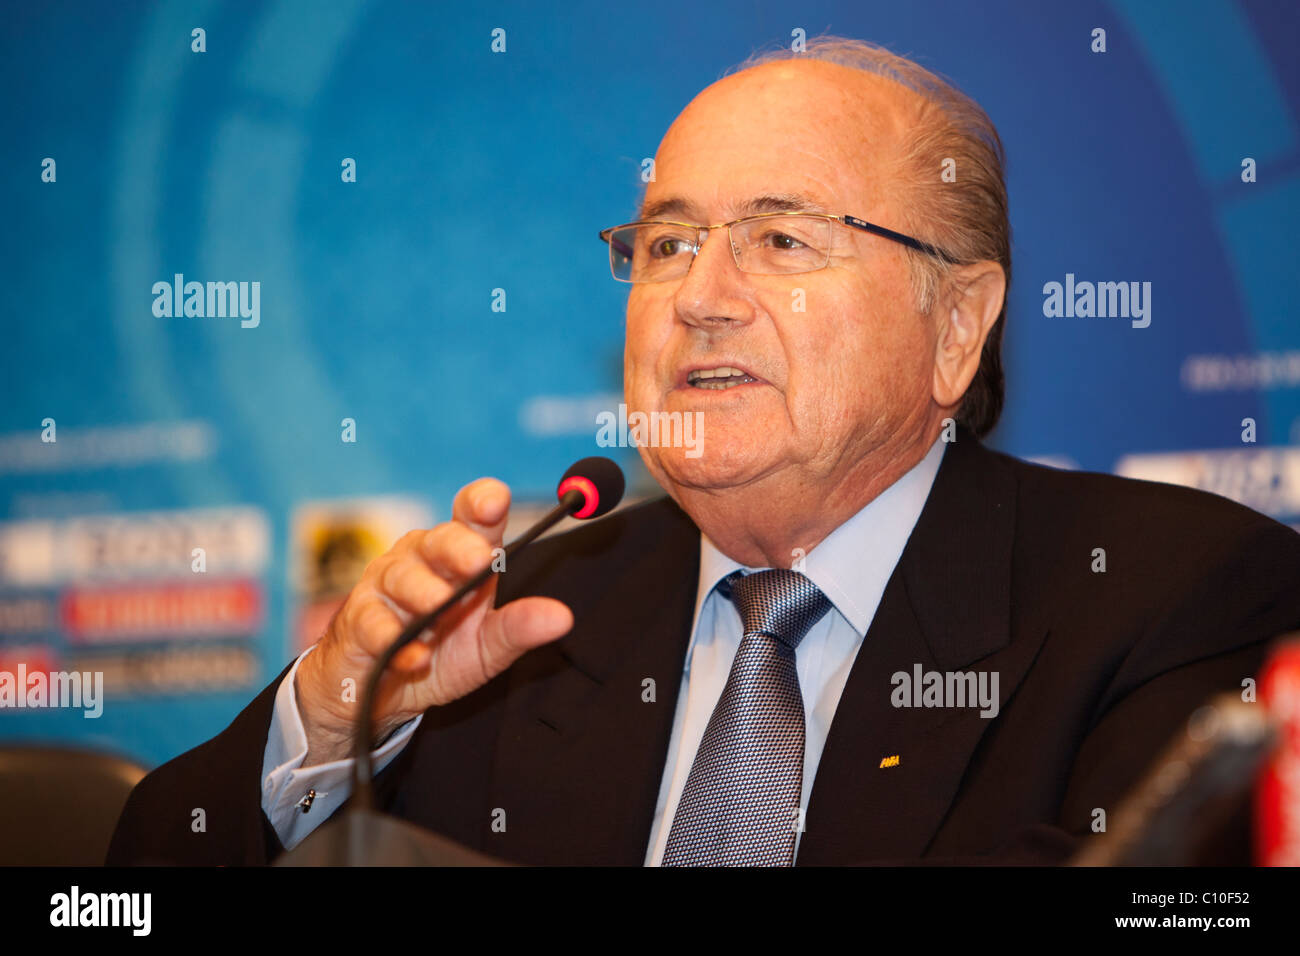 FIFA President Sepp Blatter addresses a question at a press conference ahead of the 2009 U-20 World Cup soccer championship. Stock Photo